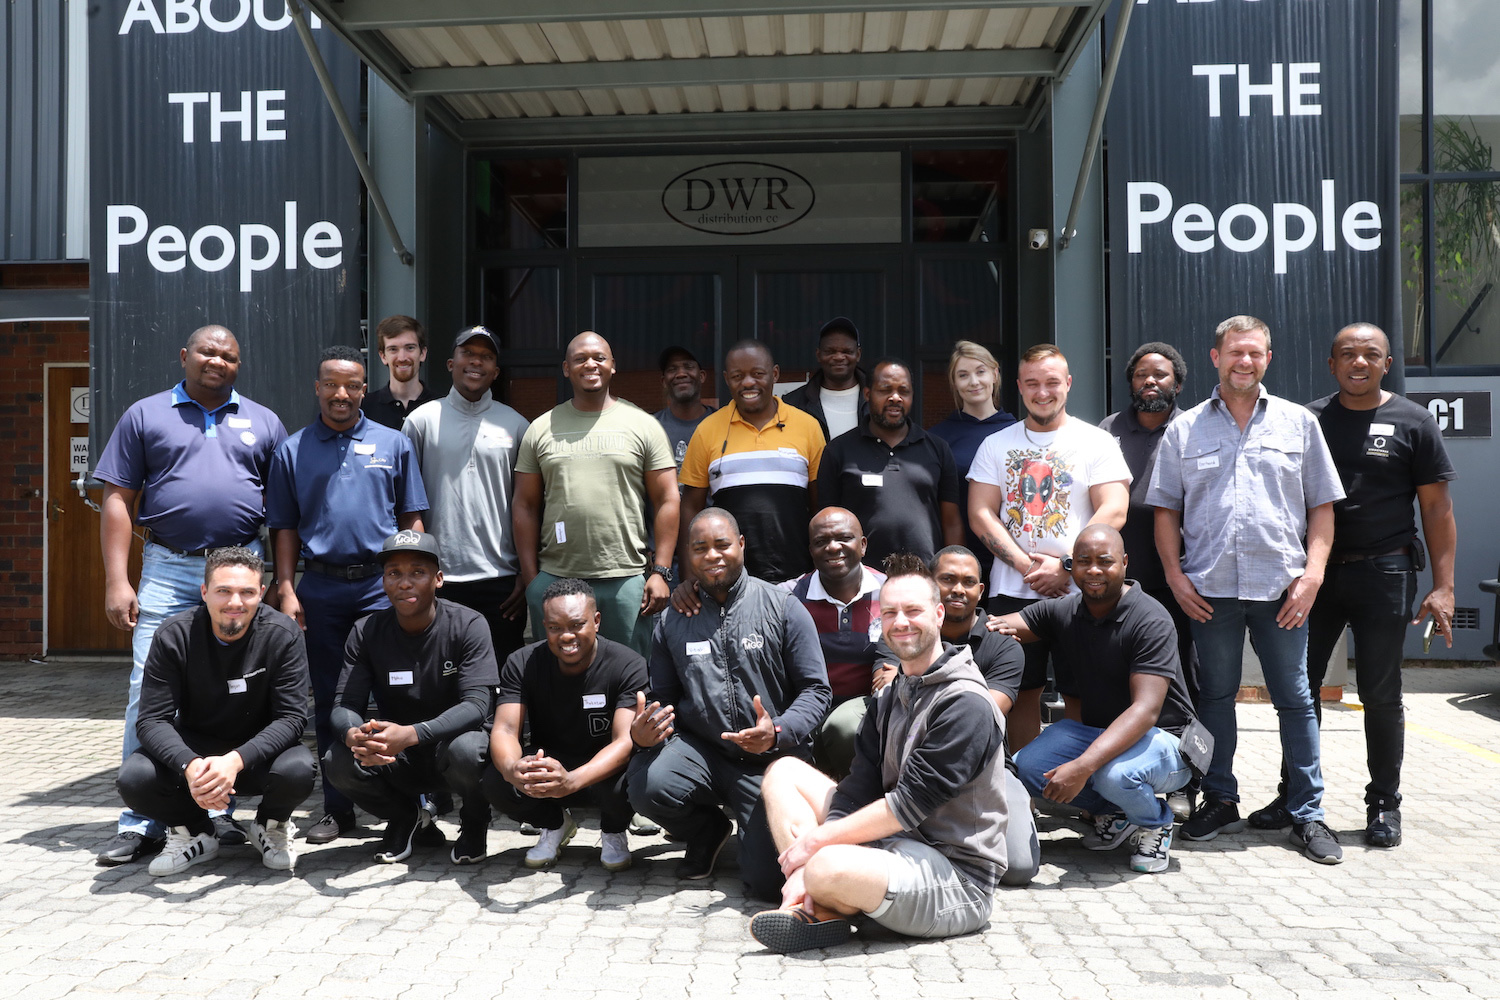 Ruud de Deugd with delegates who attended his rigging training course hosted by DWR Distribution